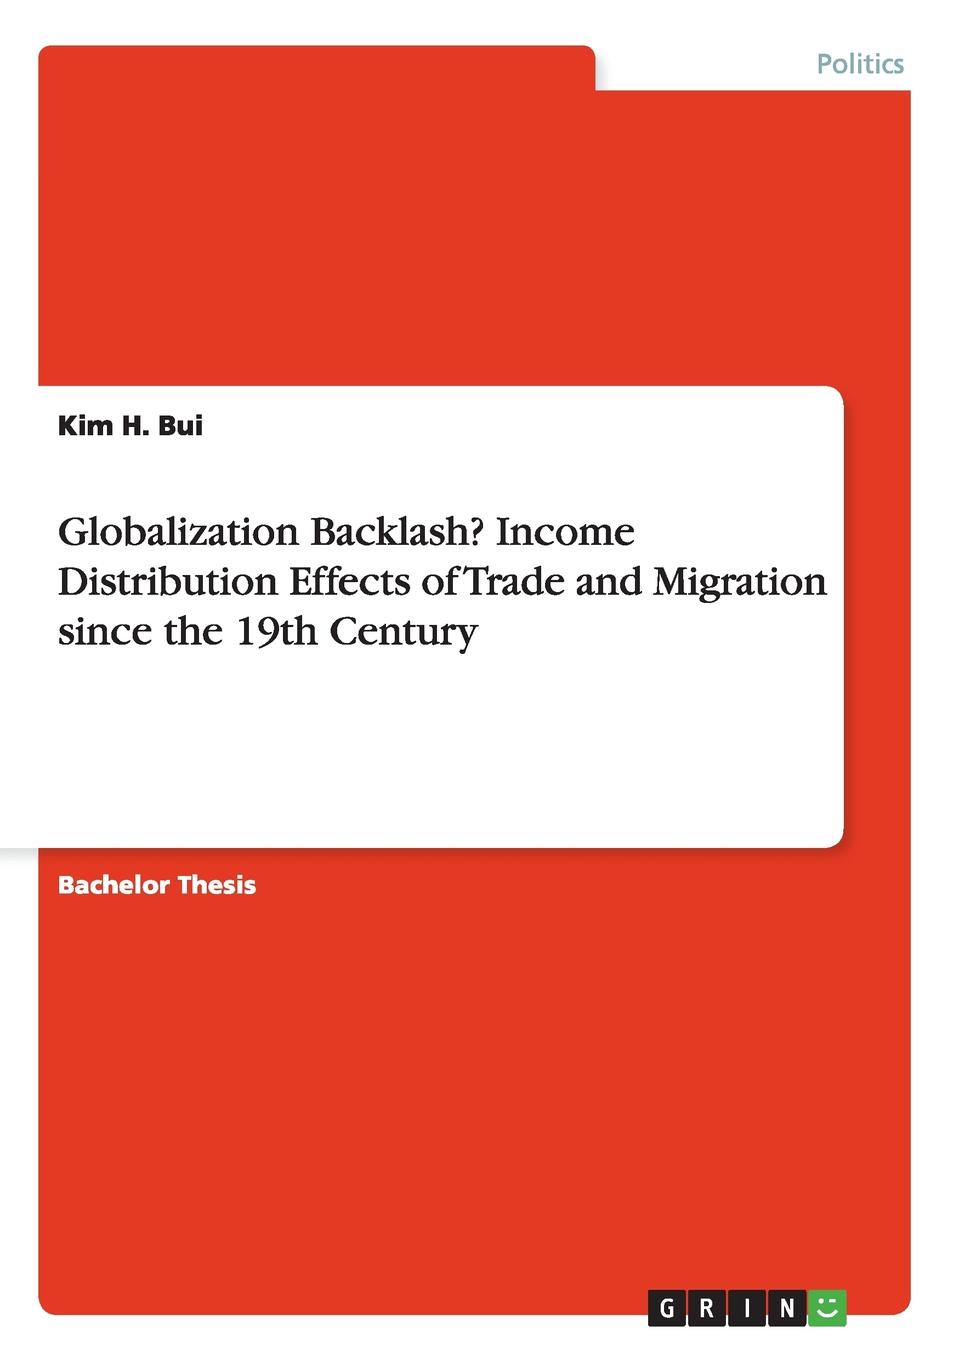 Globalization Backlash. Income Distribution Effects of Trade and Migration since the 19th Century